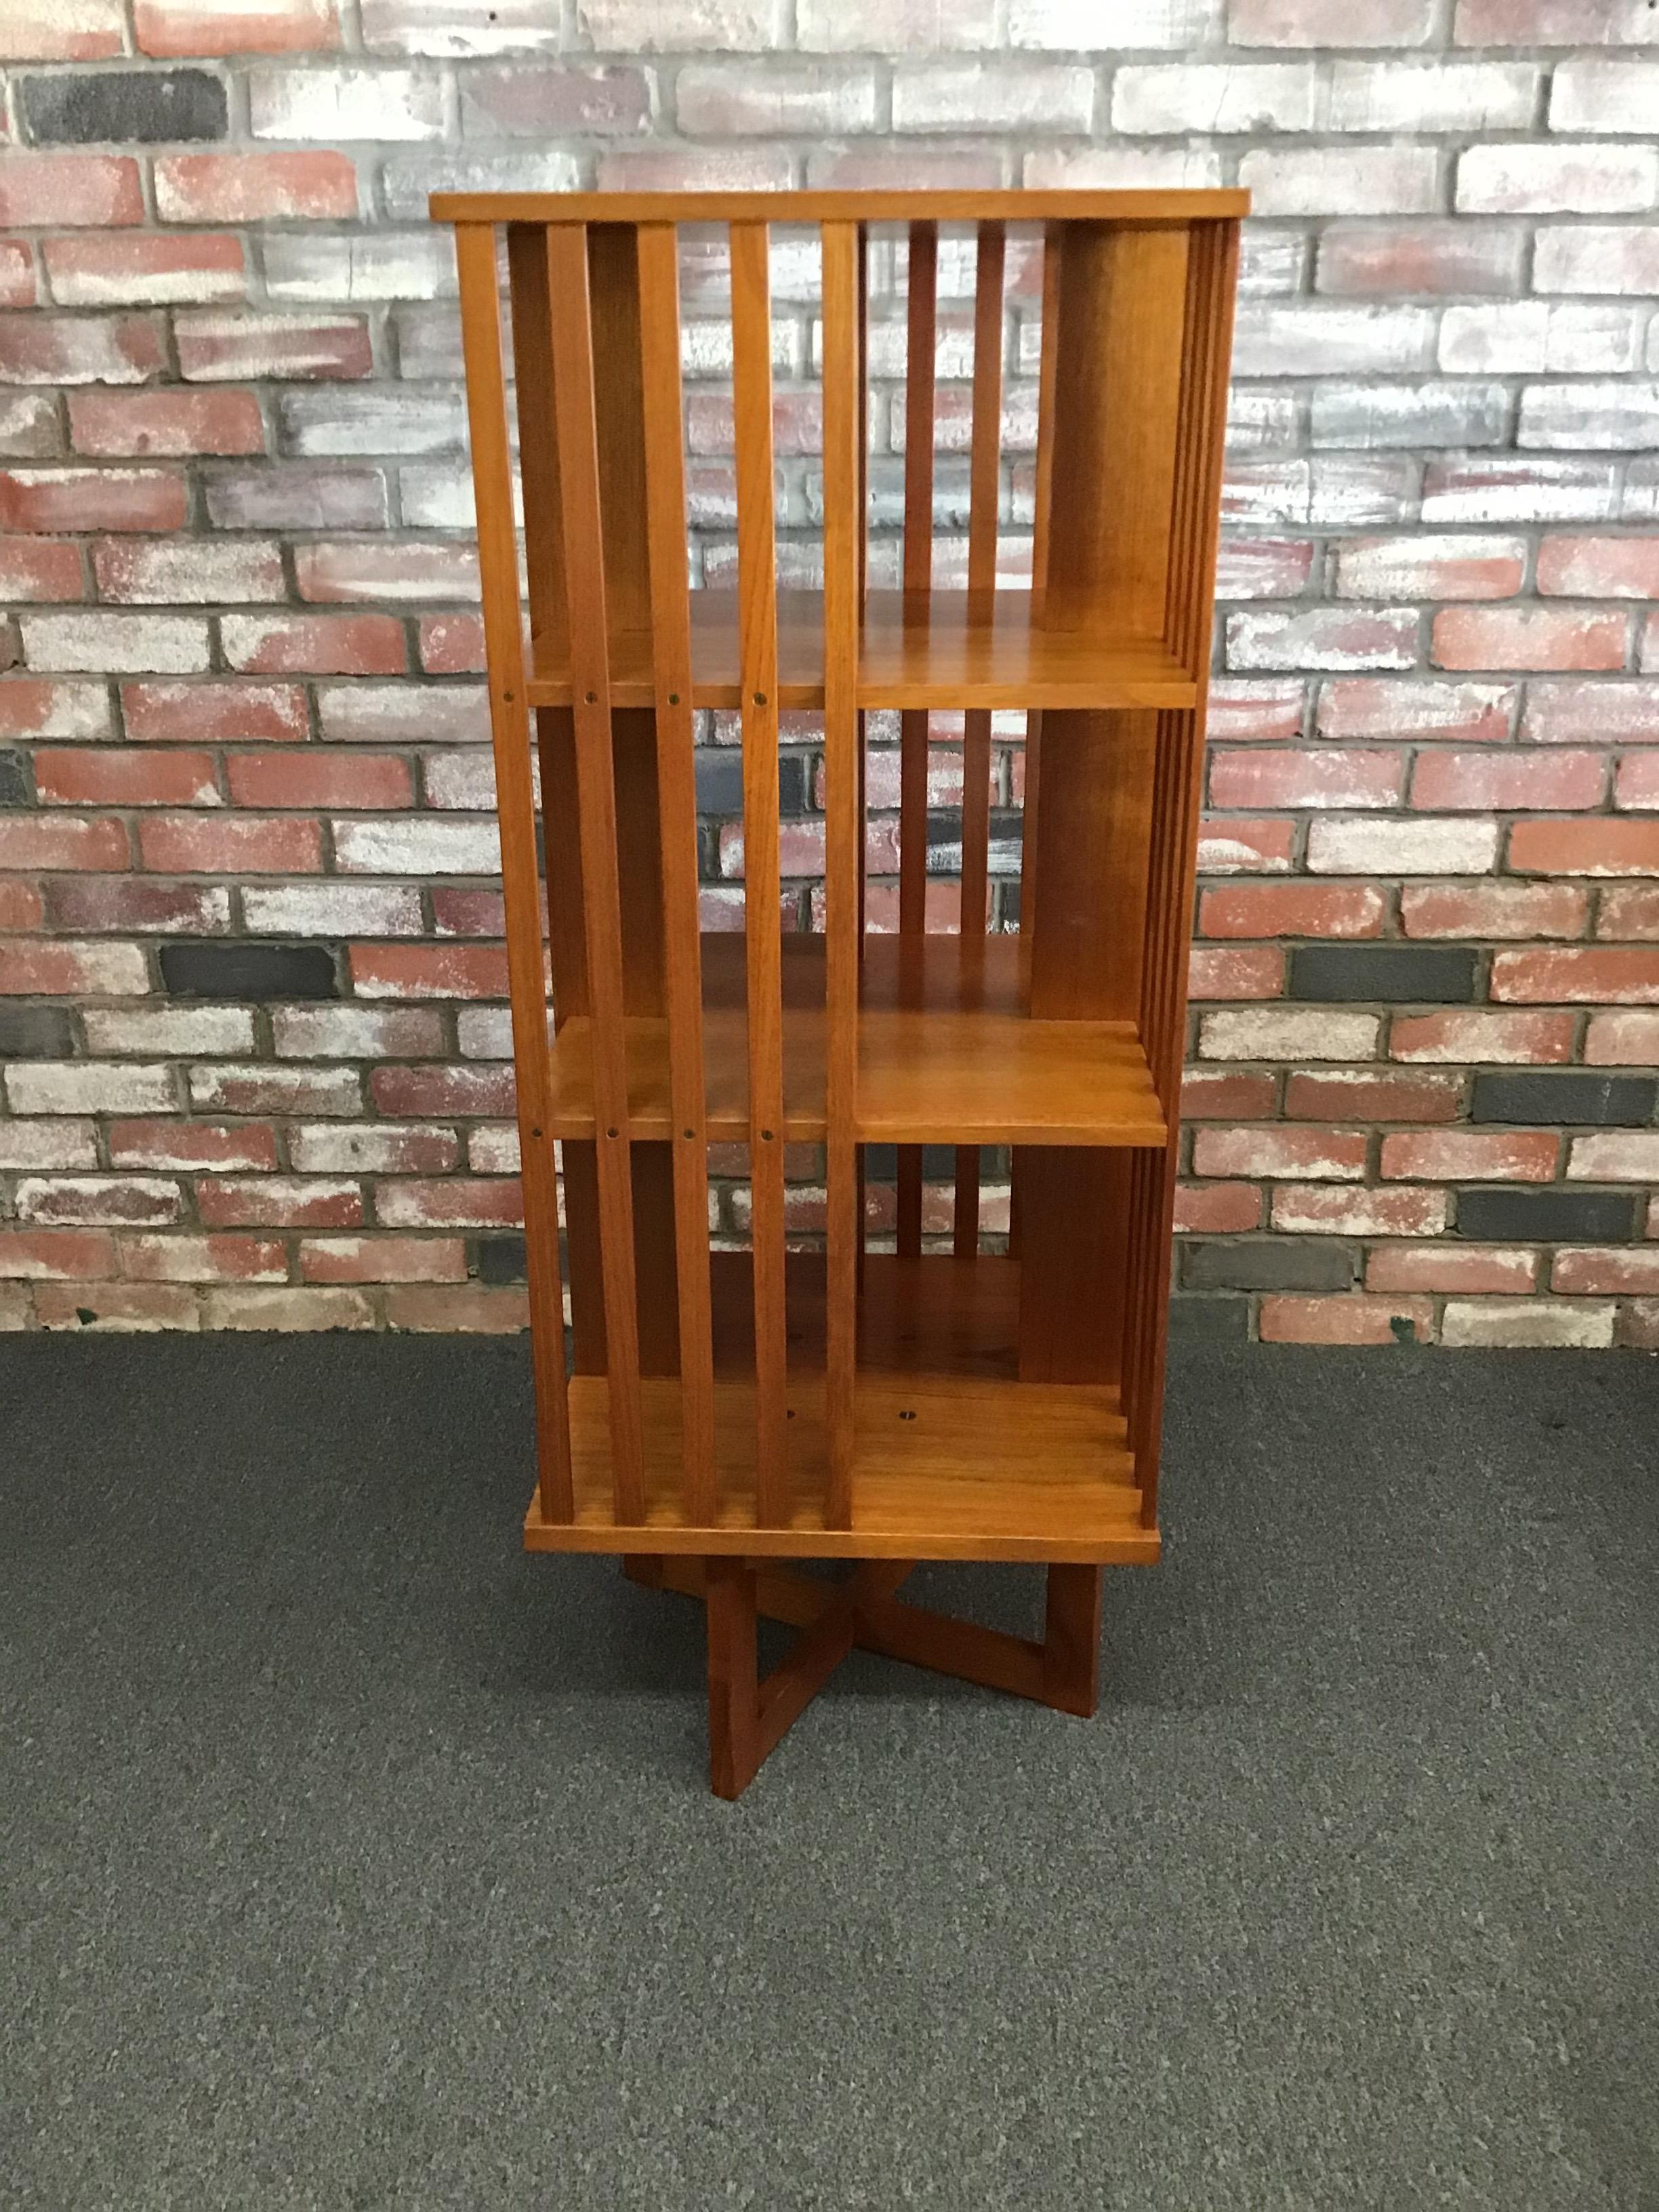 Mid-Century Modern three-tier revolving teak bookcase, circa 1970s. This bookcase is a very practical piece for any room in the house. The case holds a ton of books in an efficient compact manner, the top shelf is 10.5